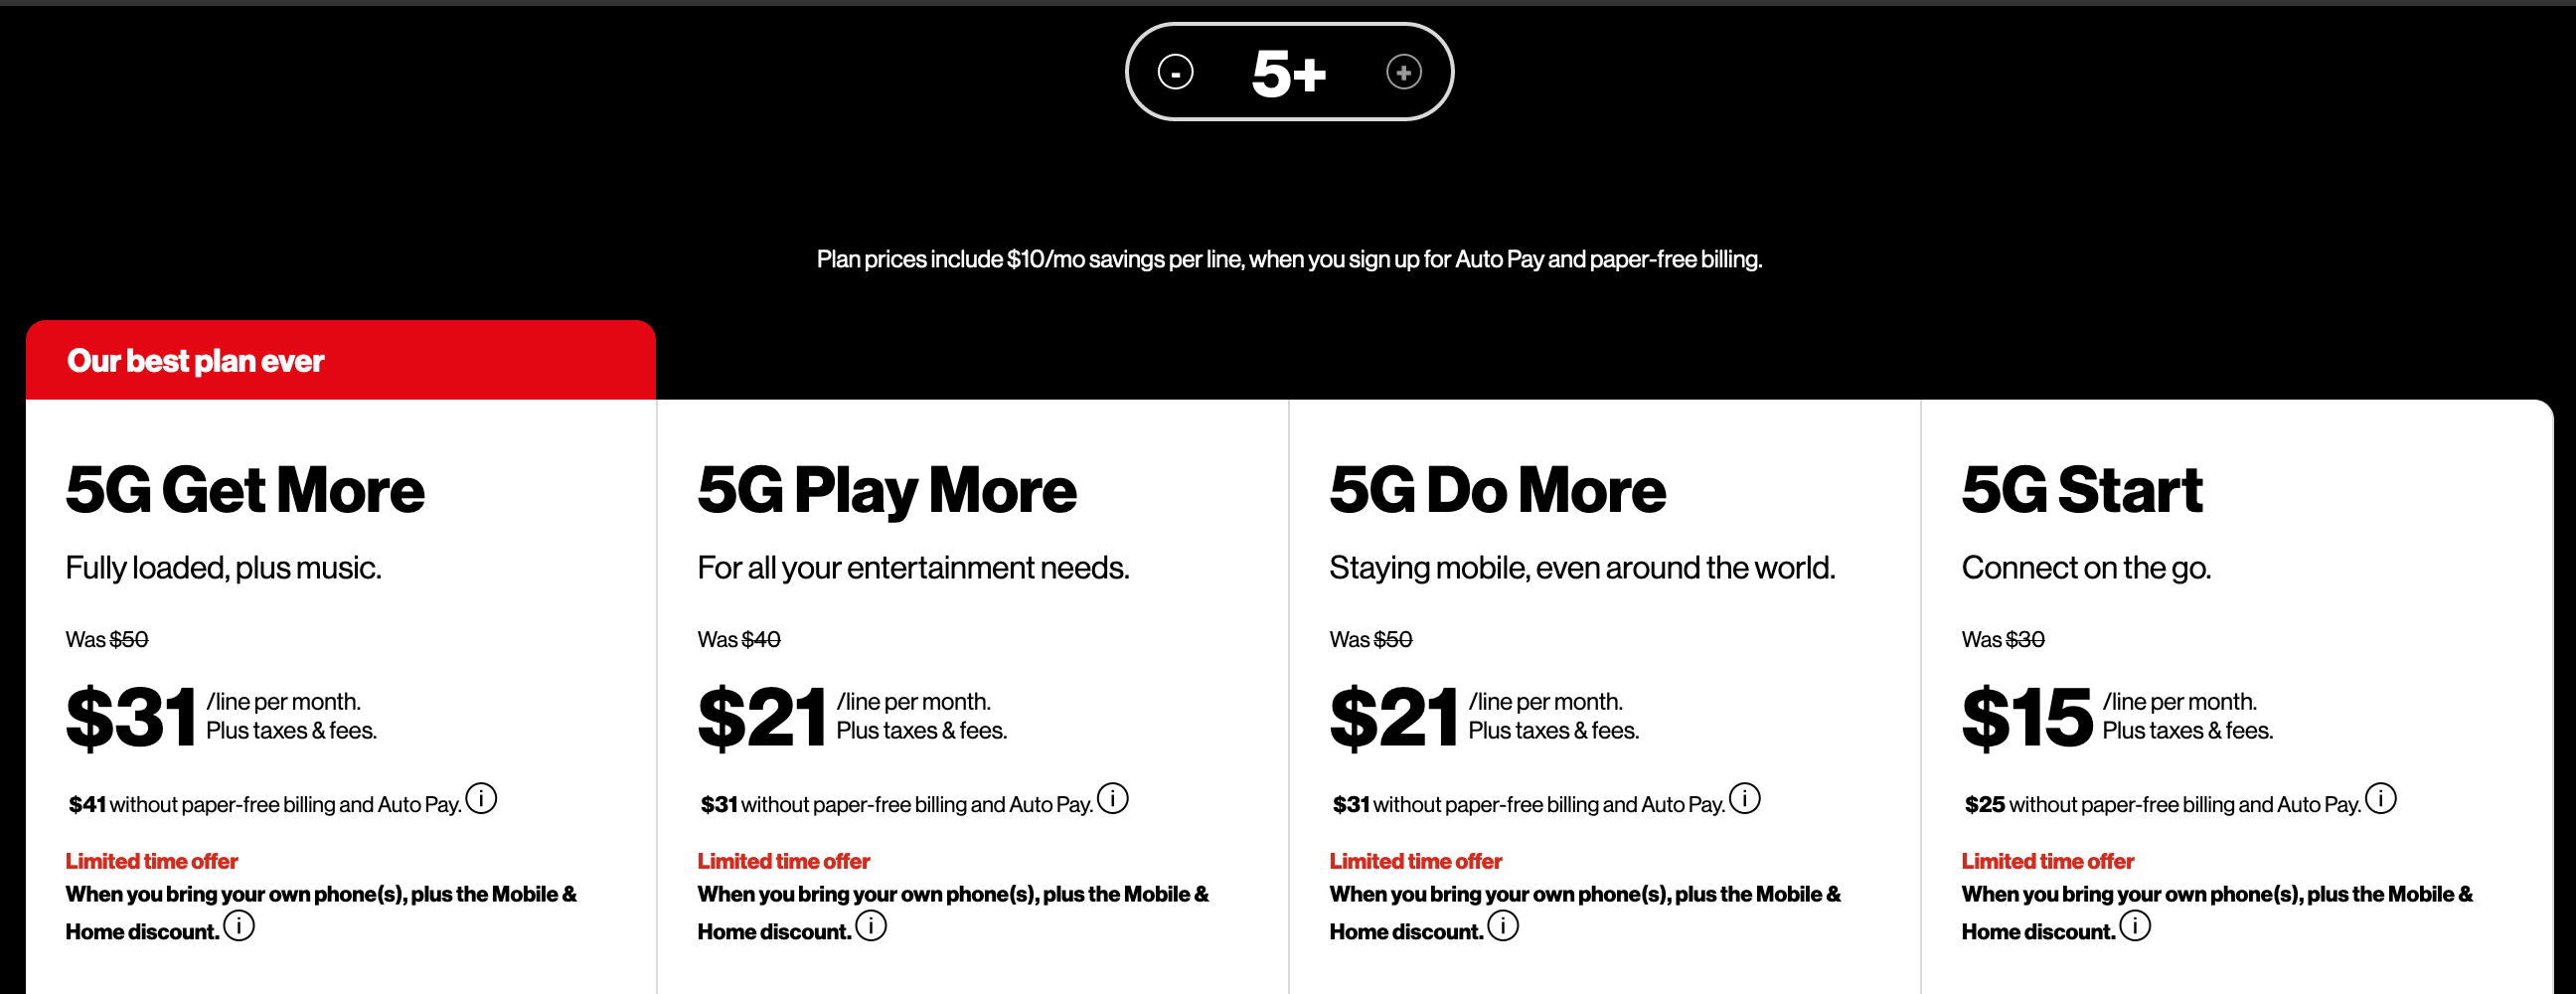 Fios customers: Verizon Wireless plans starting at $15 per line with 5 lines